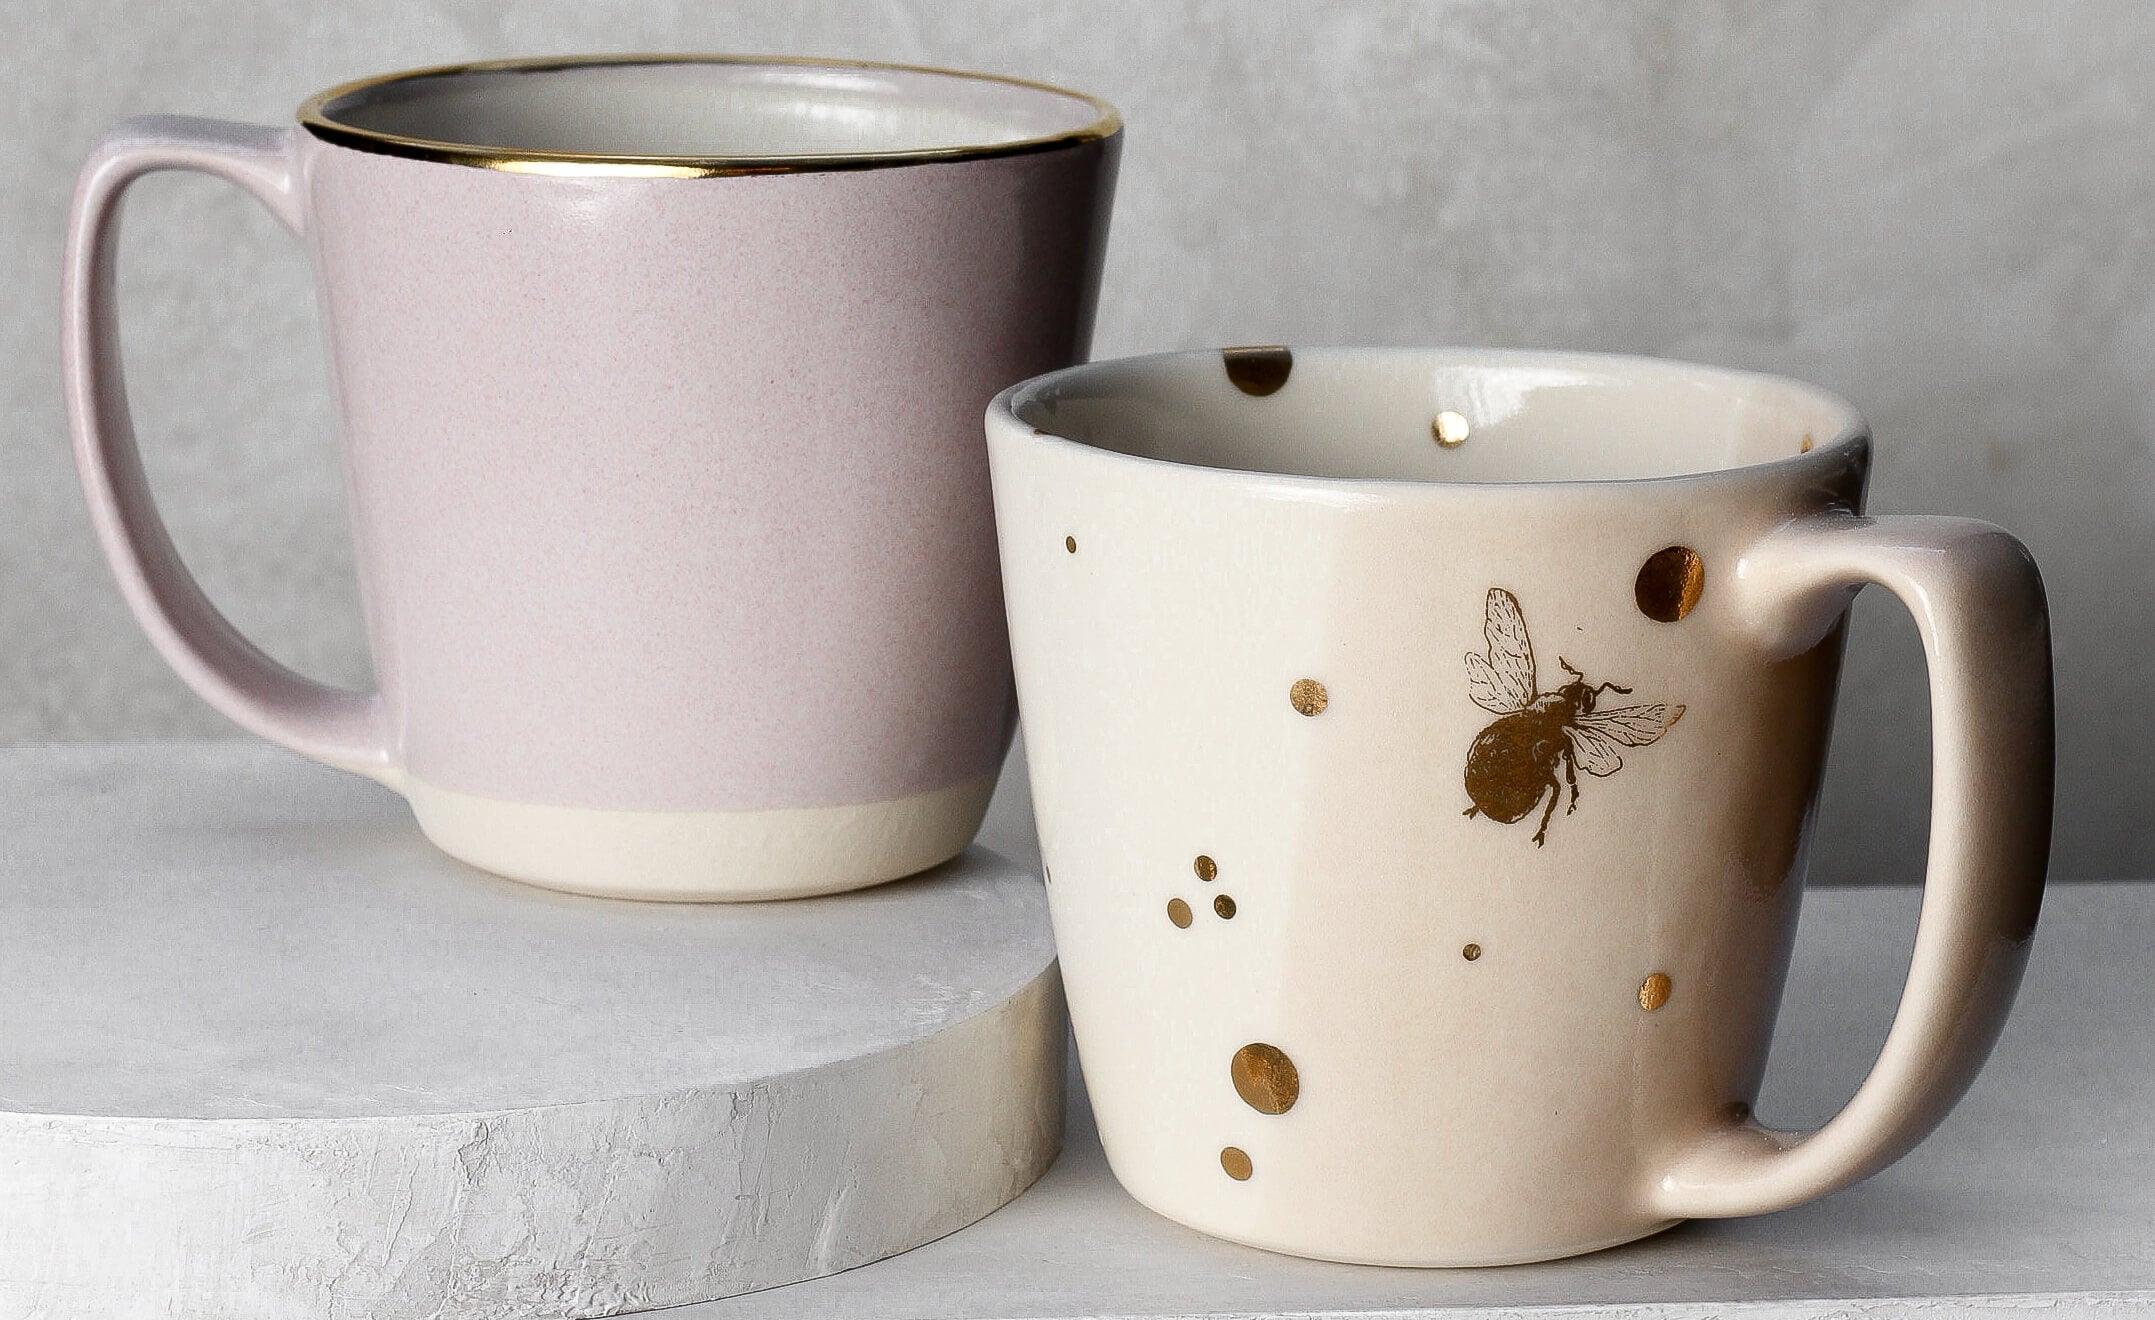 Opal and Drops of Honey Collection mugs with handles as the focus